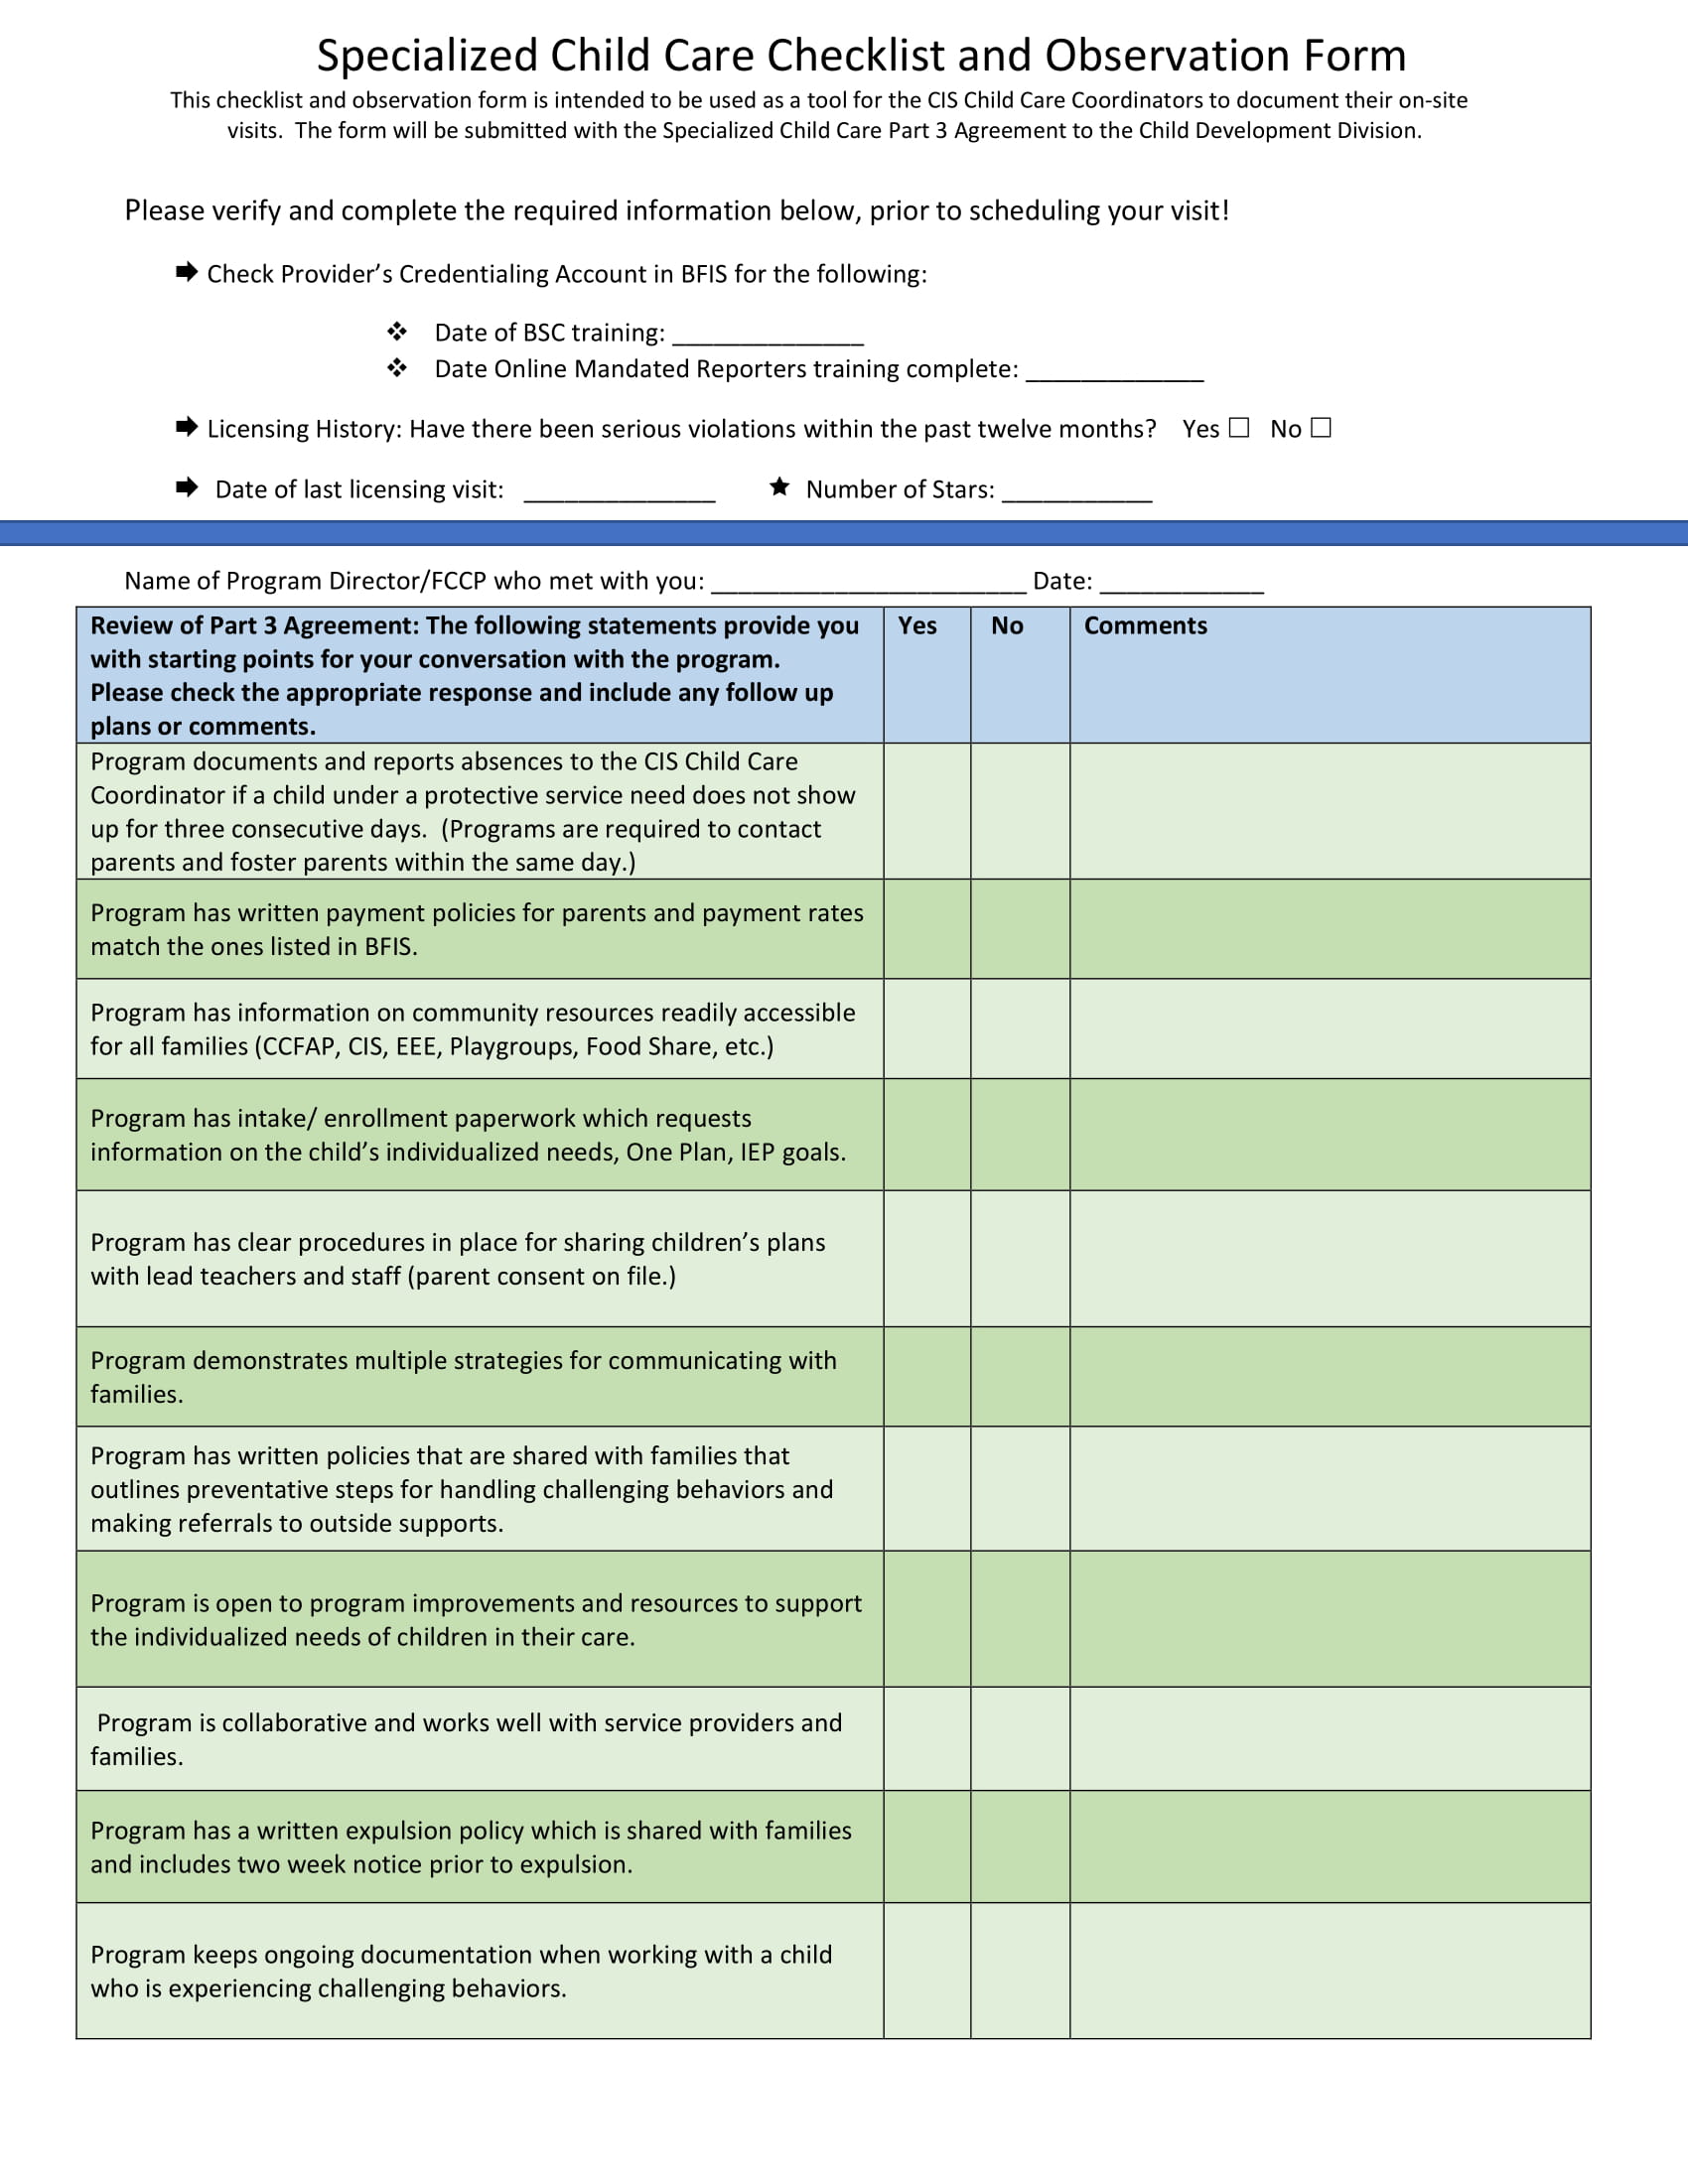 specialized child care checklist observation form 1